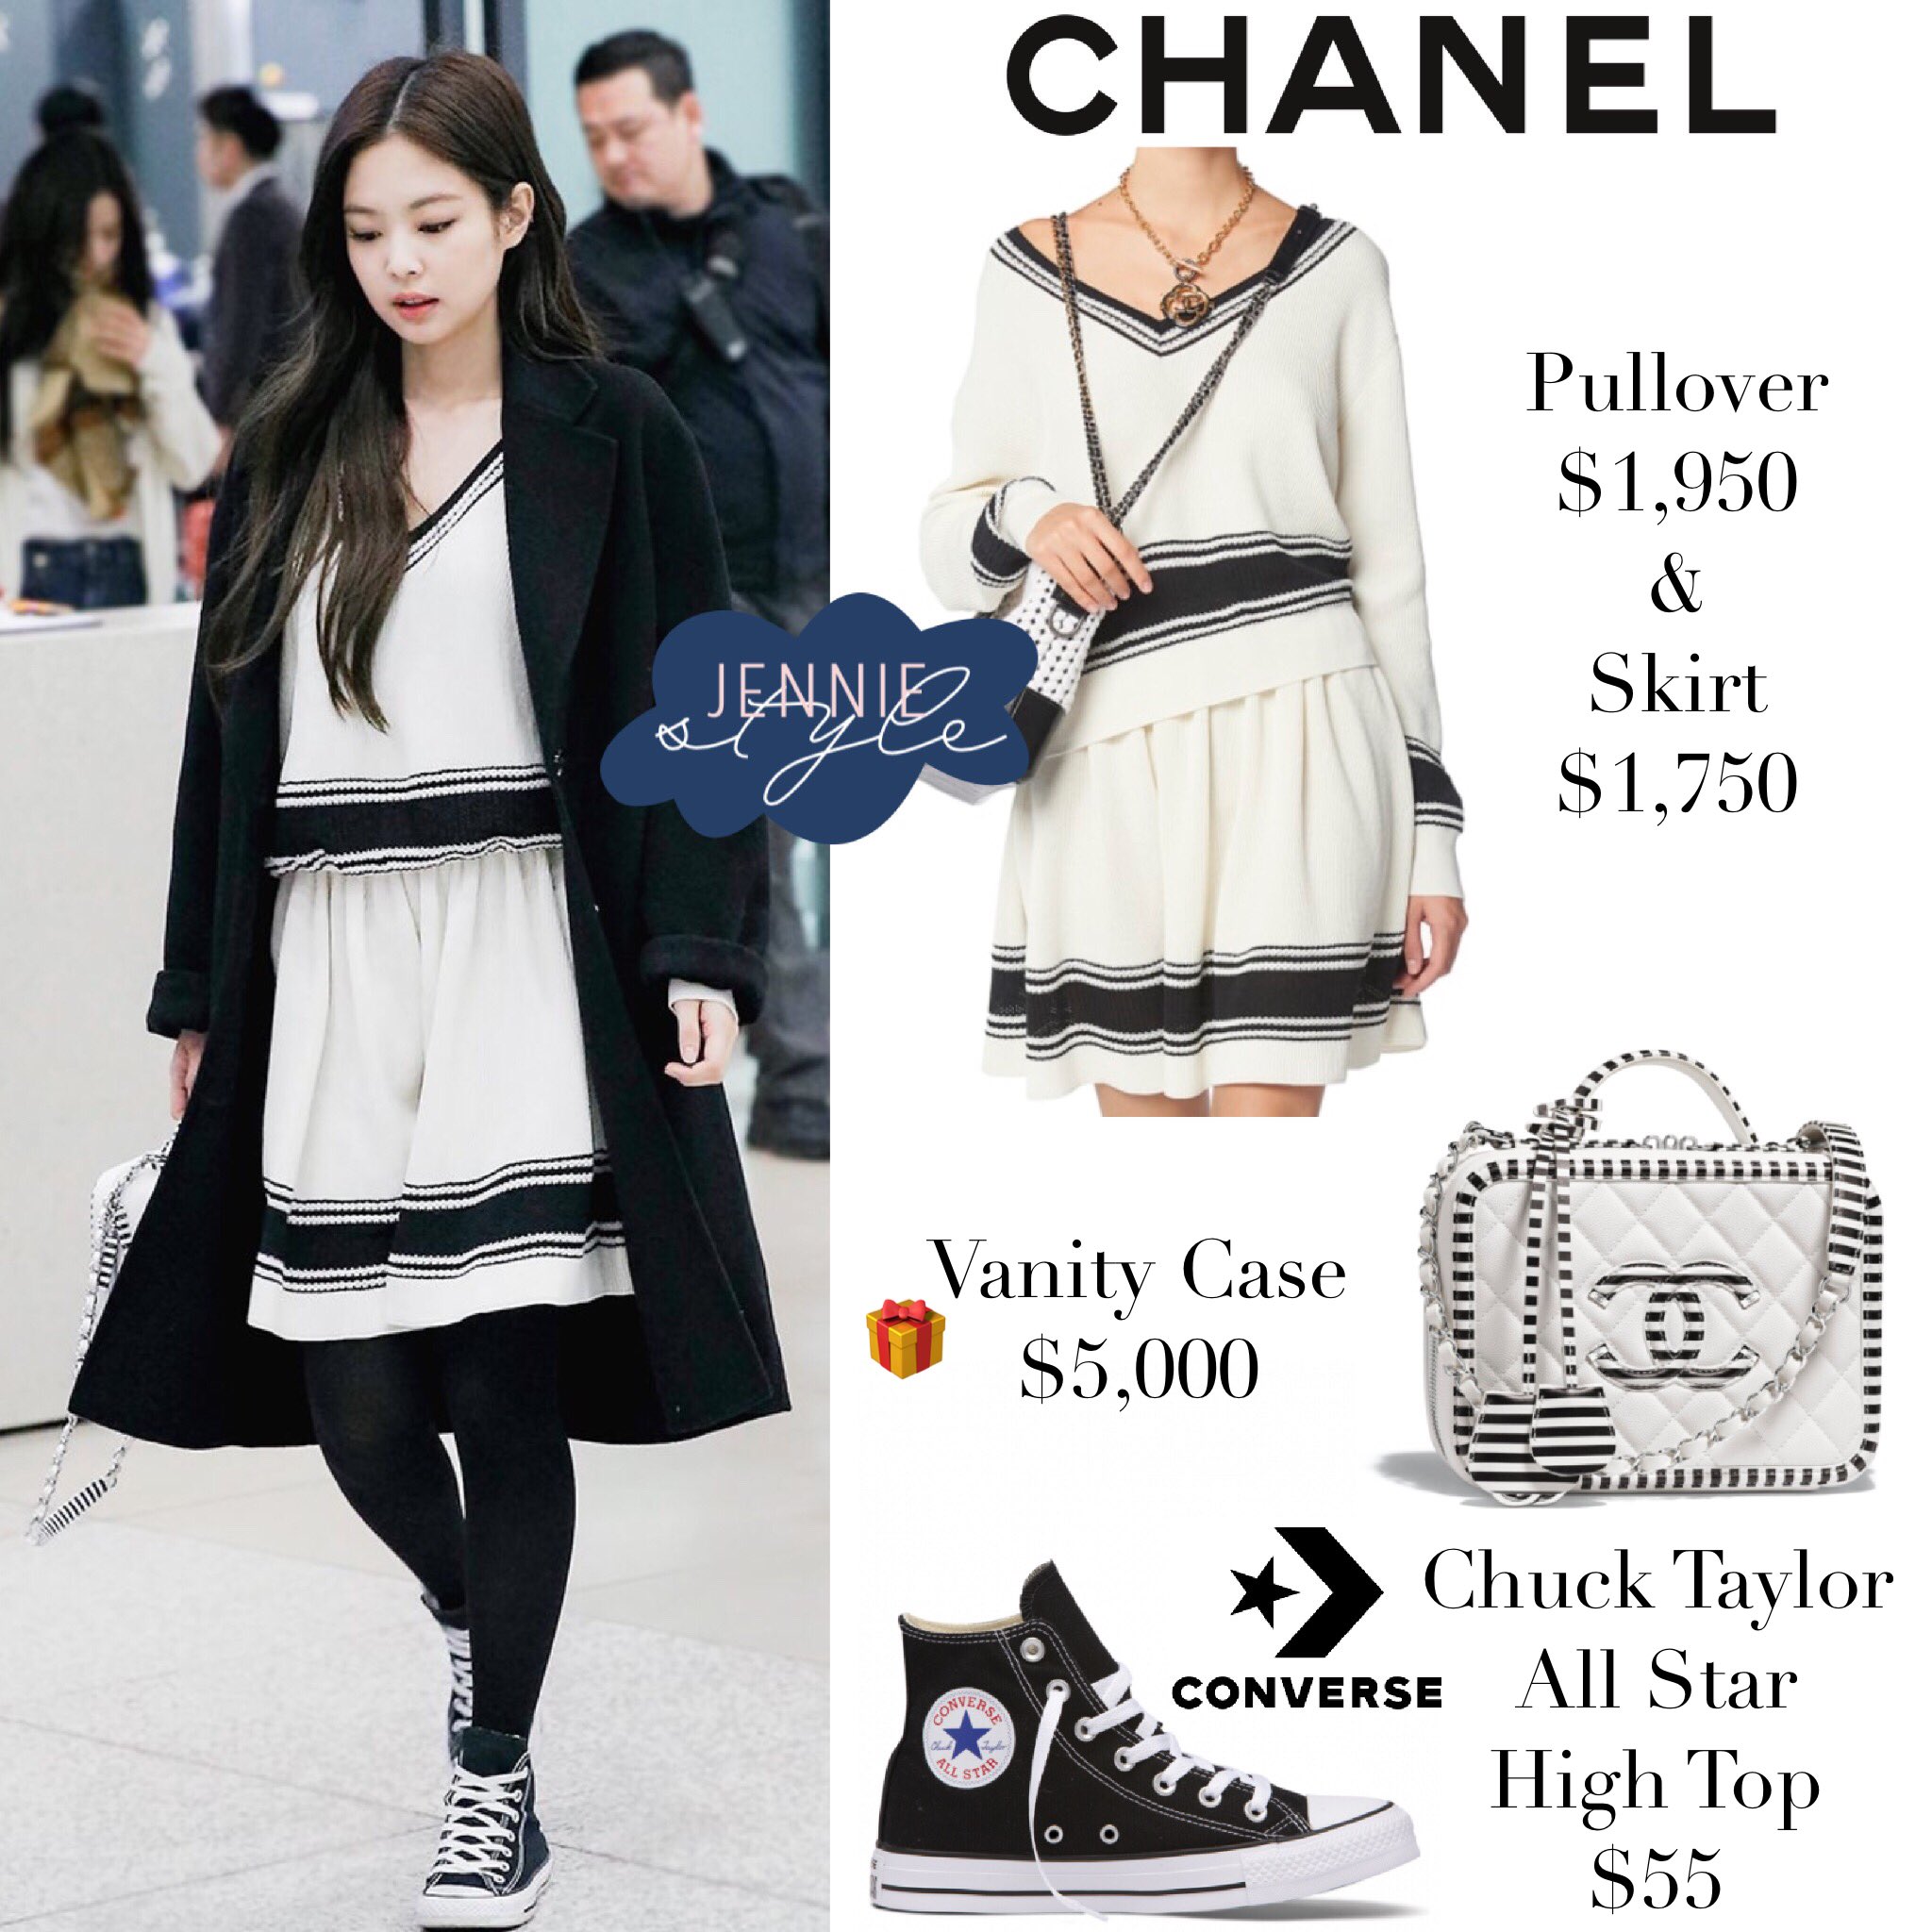 Jennie Style в X: „Incheon Airport 190711 CHANEL Vintage Top $590 (in  pink), Wallet on Chain $1,220 & Dr.Martens 8053 Nappa $125 #jennie # jenniekim #blackpink⁠ #blackpinkfashion #blackpinkstyle #jenniefashion # jenniestyle  / X